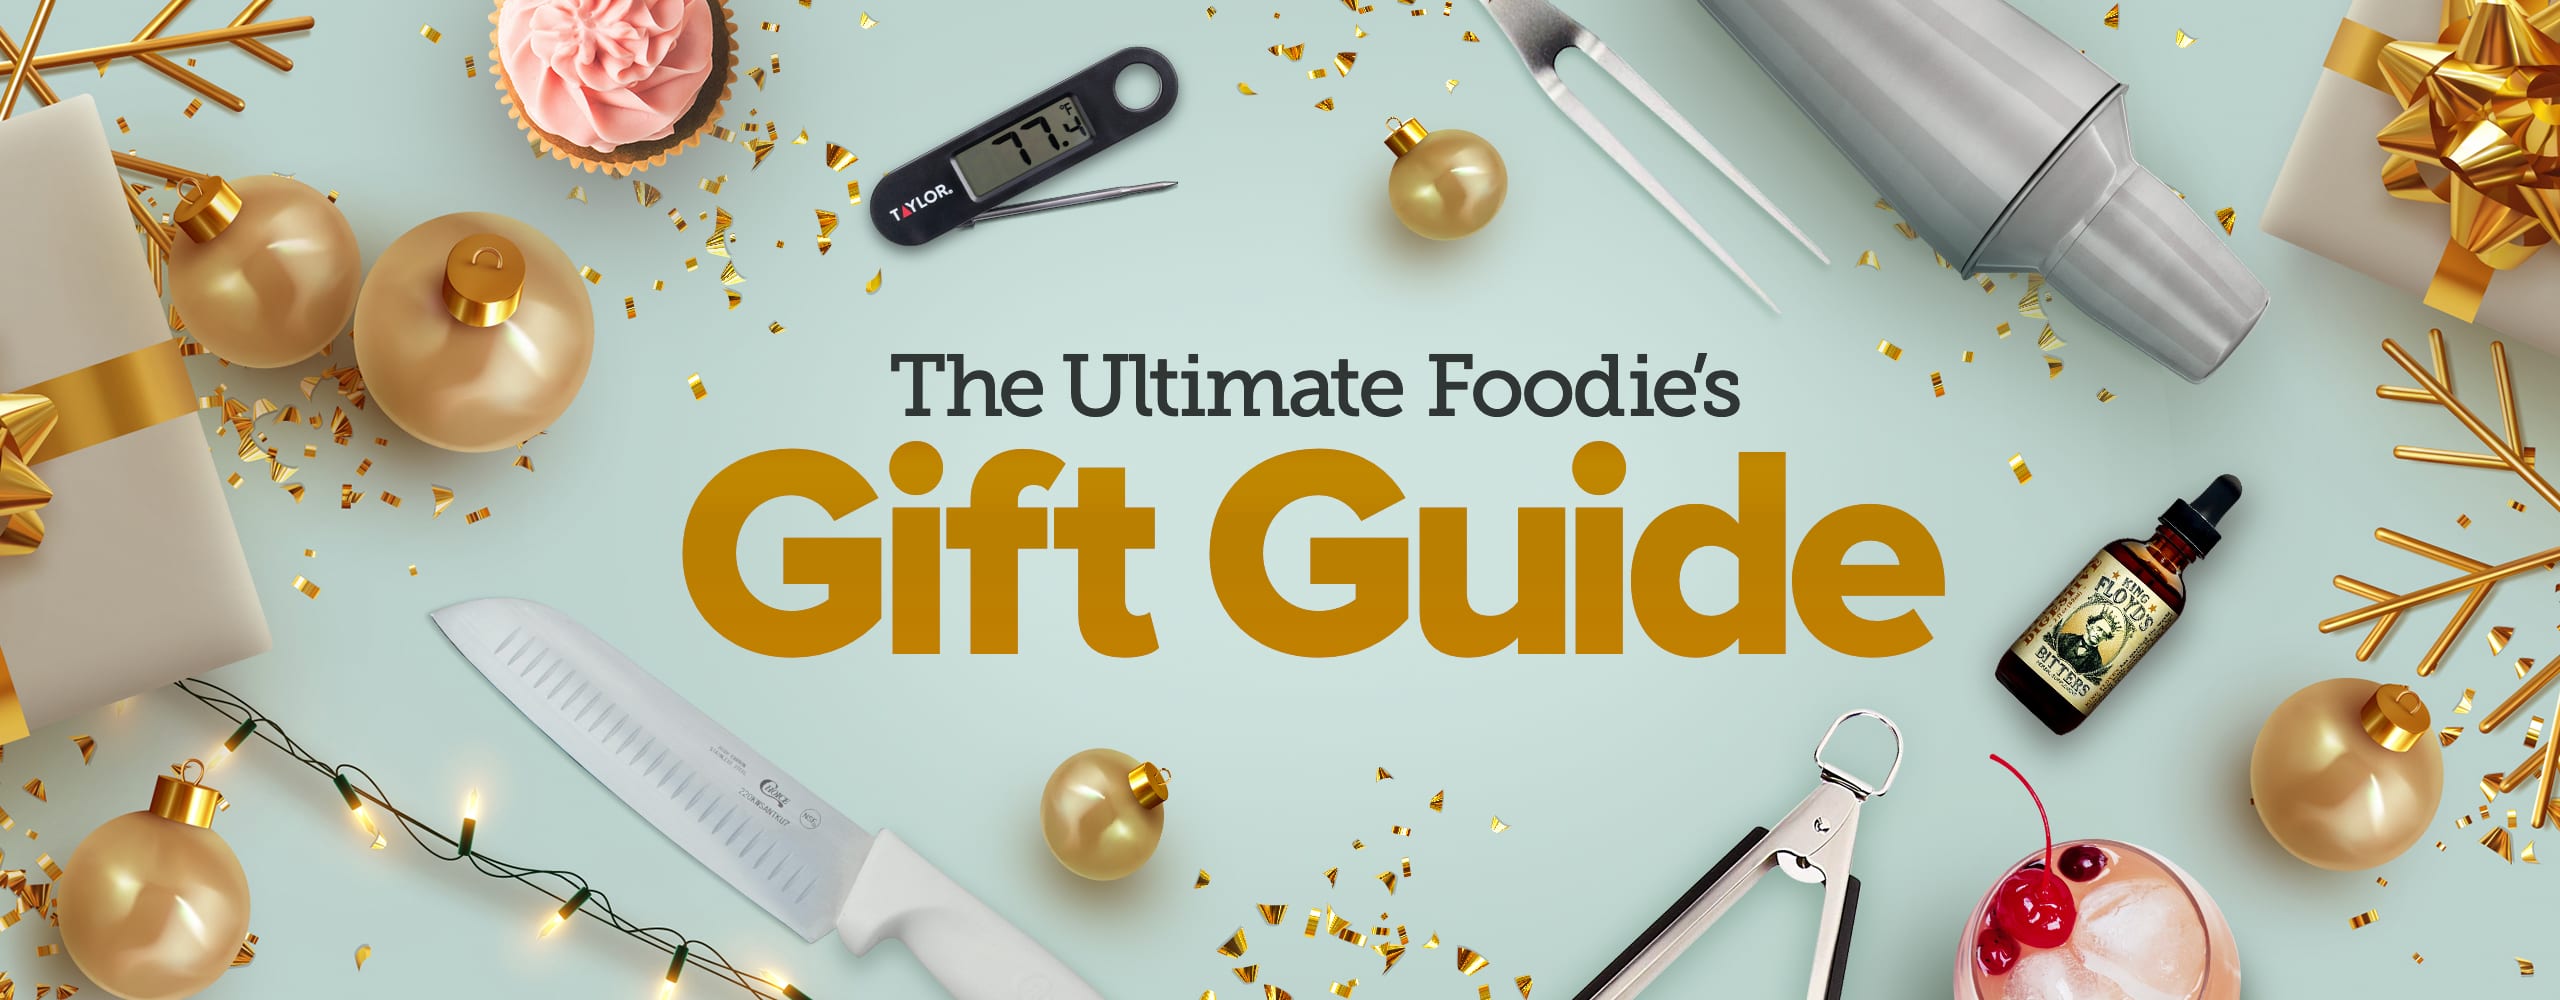 The Best Gifts for Chefs & Foodies in 2024